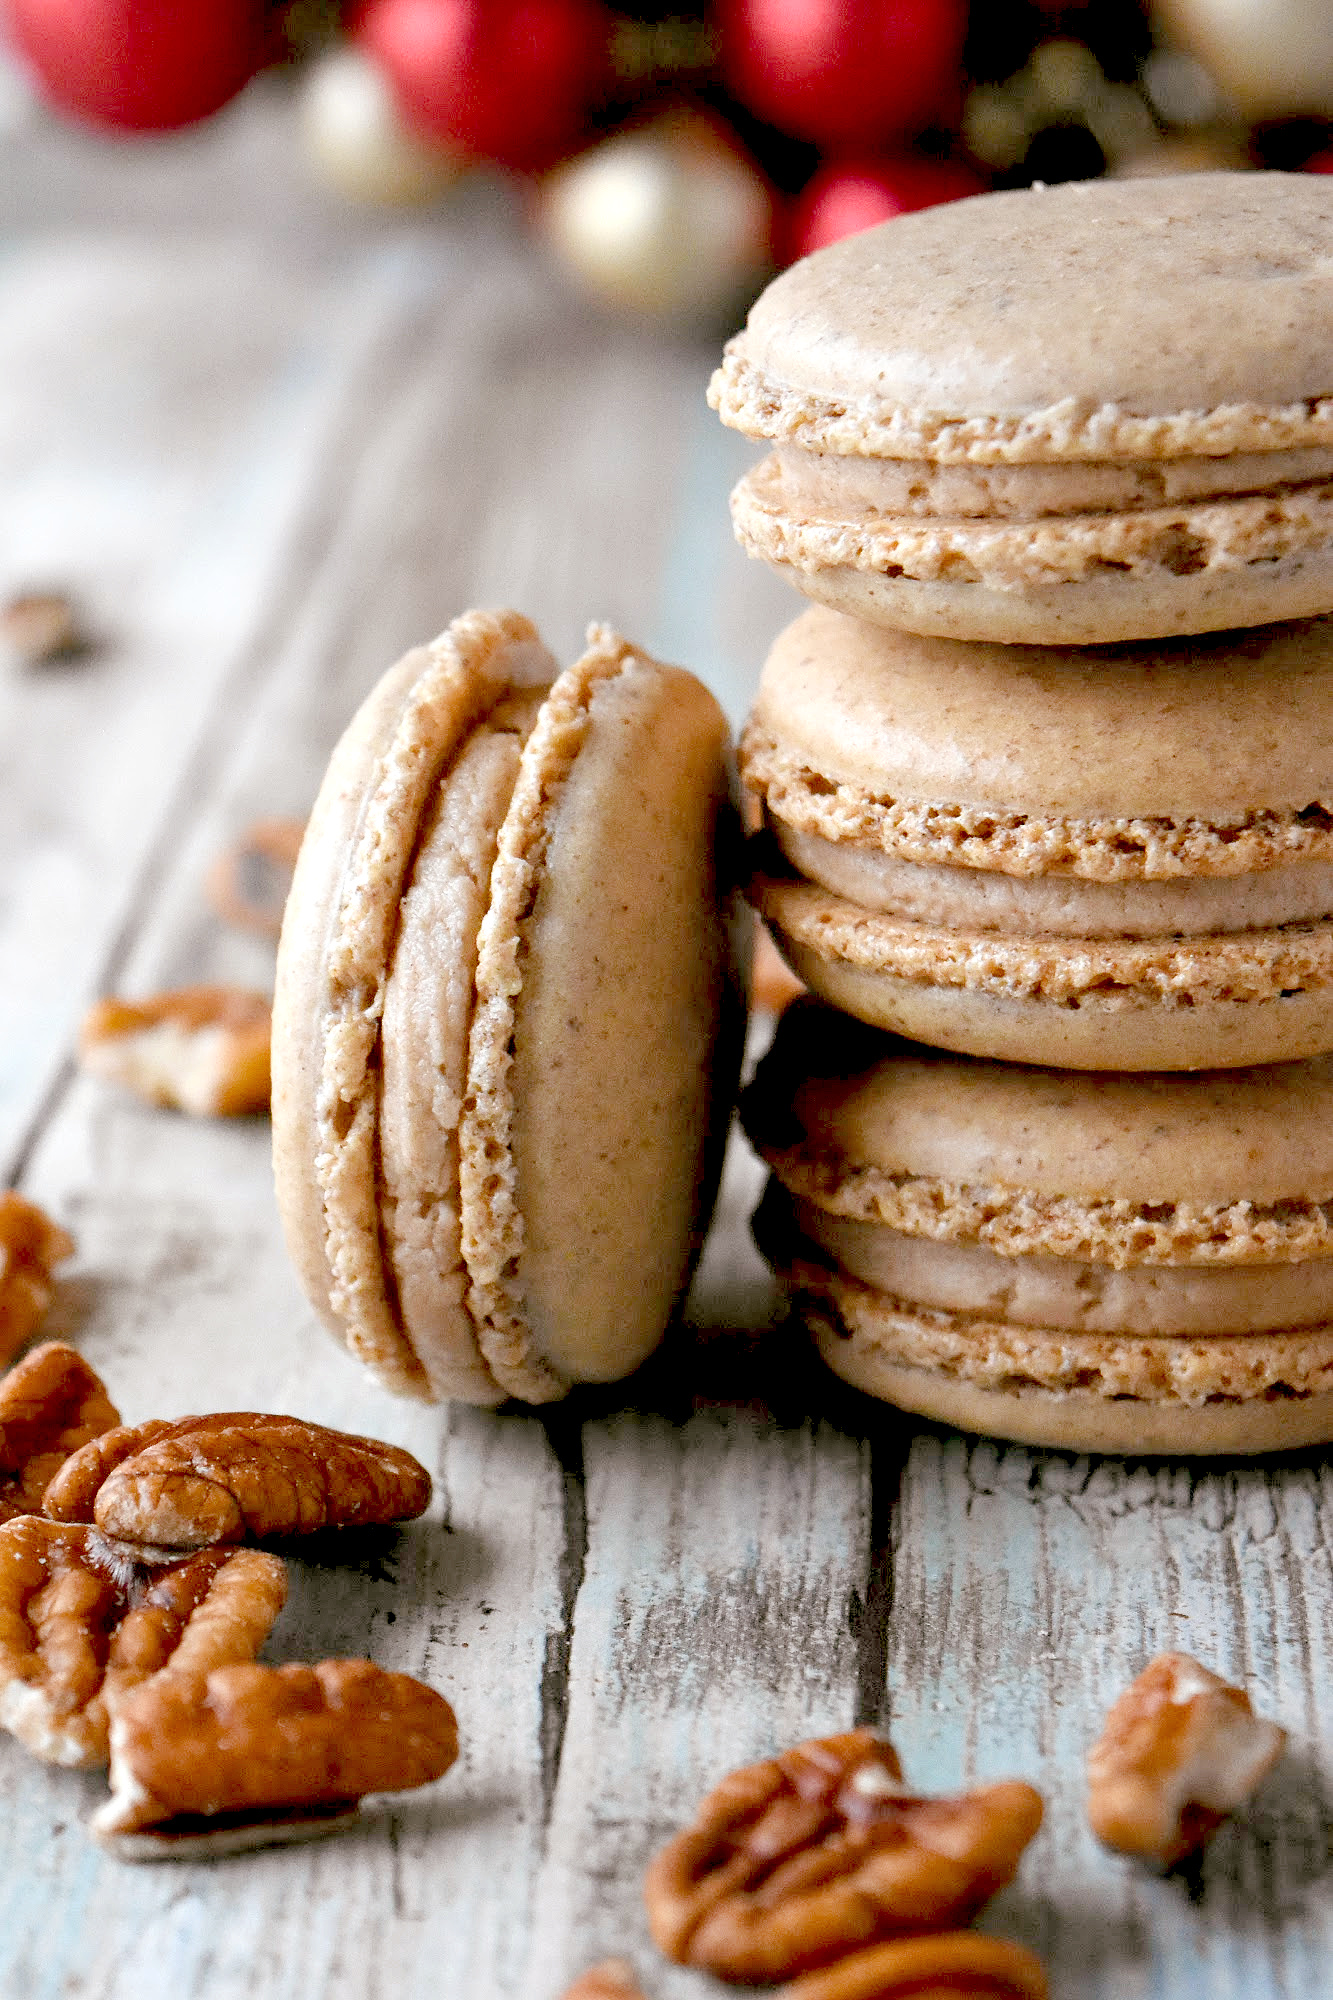 Cinnamon Pecan Macaron have the flavor of those fair cinnamon pecans in a macaron cookie.  They’re packed with pecan and cinnamon flavors with a hint of caramel in the filling. #ChristmasCookies